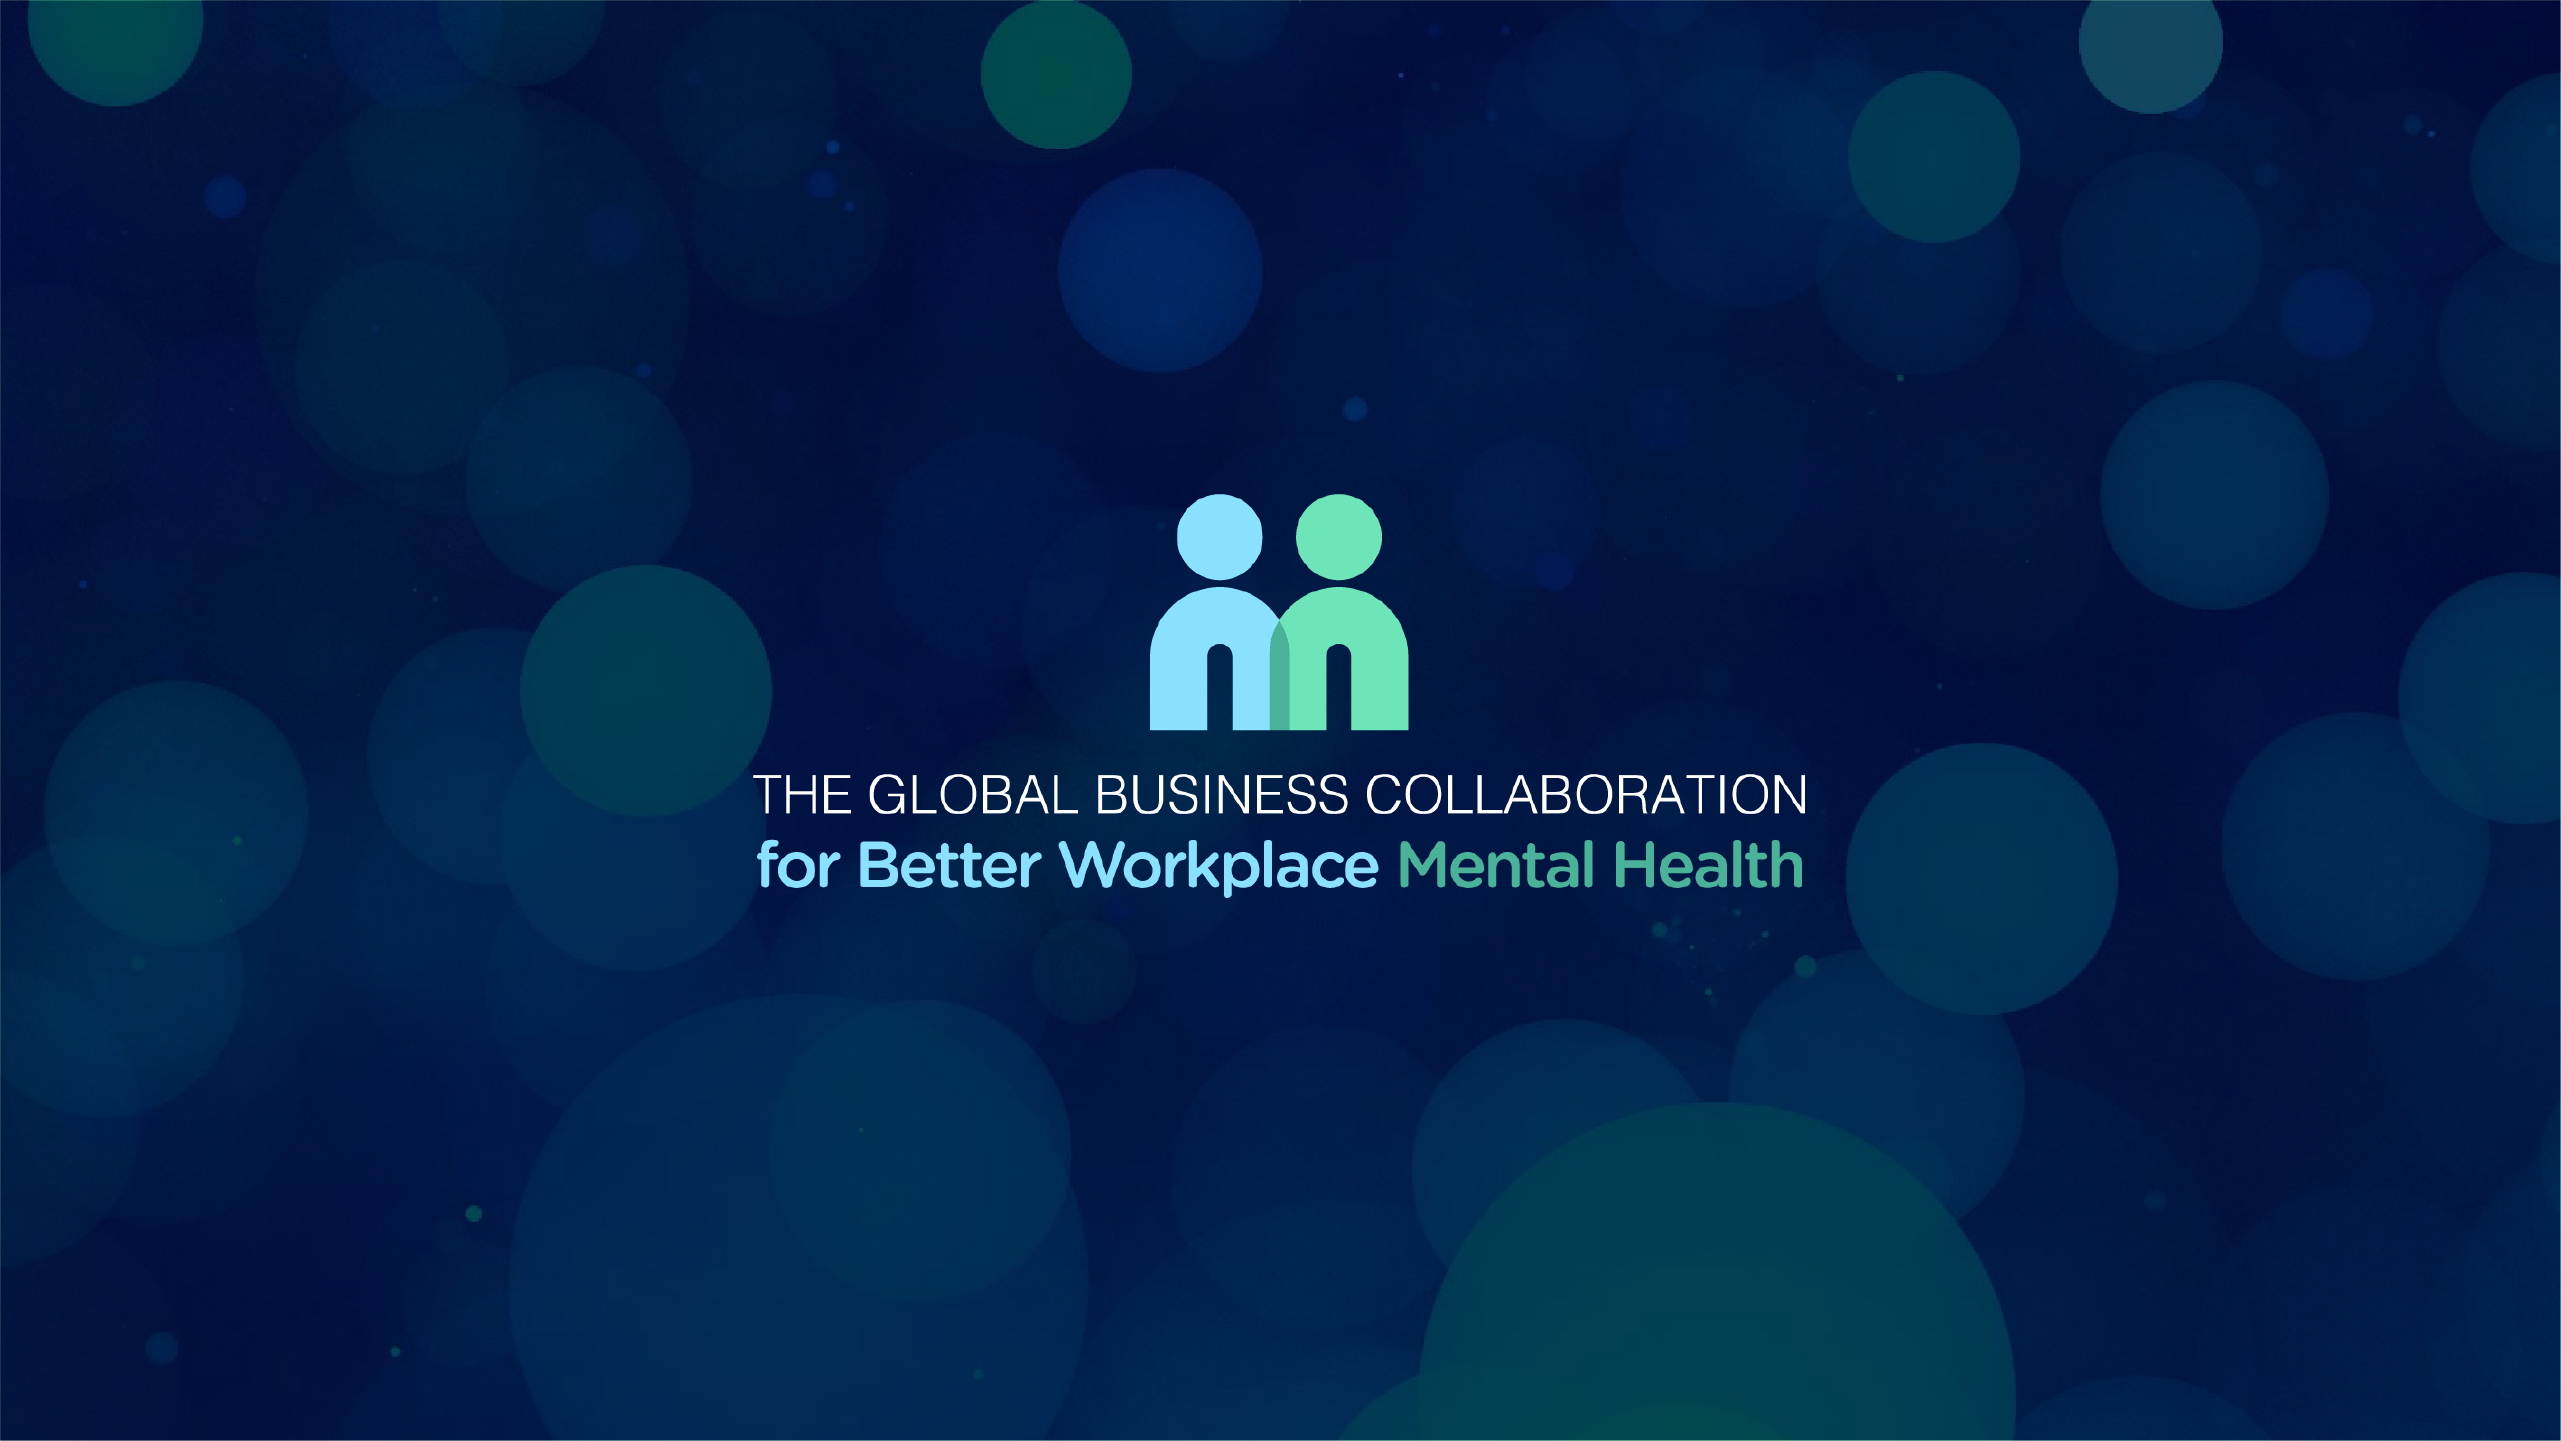 Global Business Collaboration for Better Workplace Mental Health logo on blue background